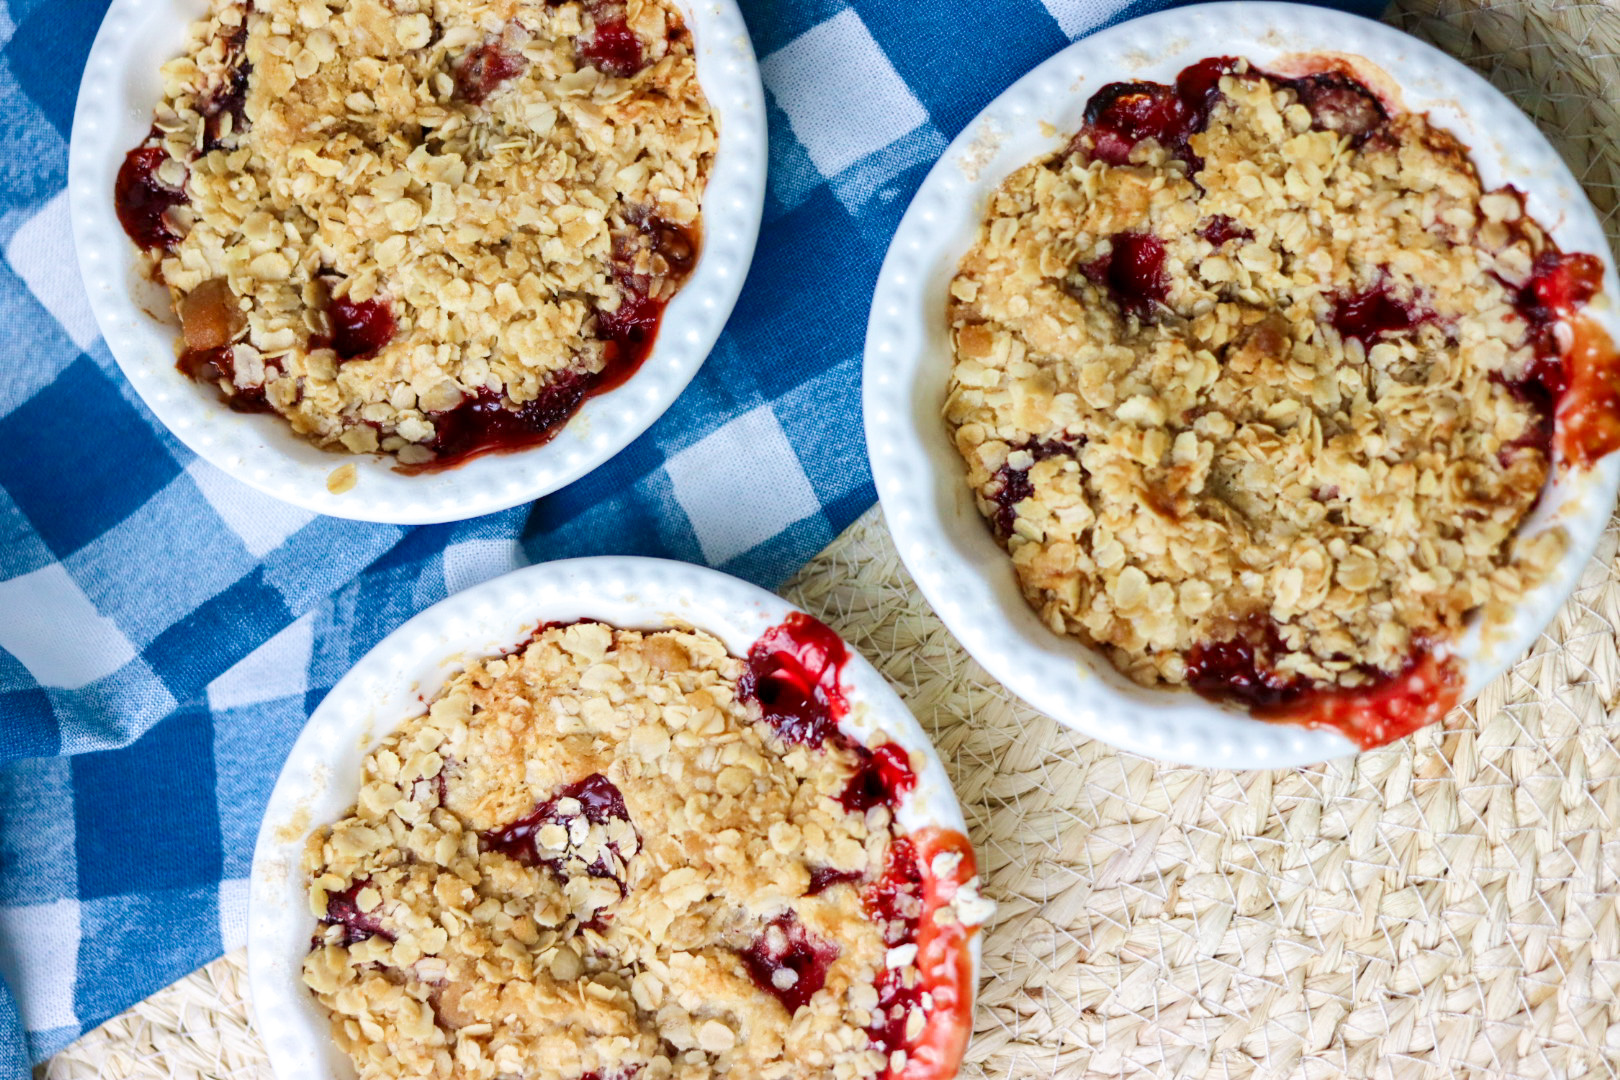 strawberry rhubarb crisp you can make in 10 minutes!